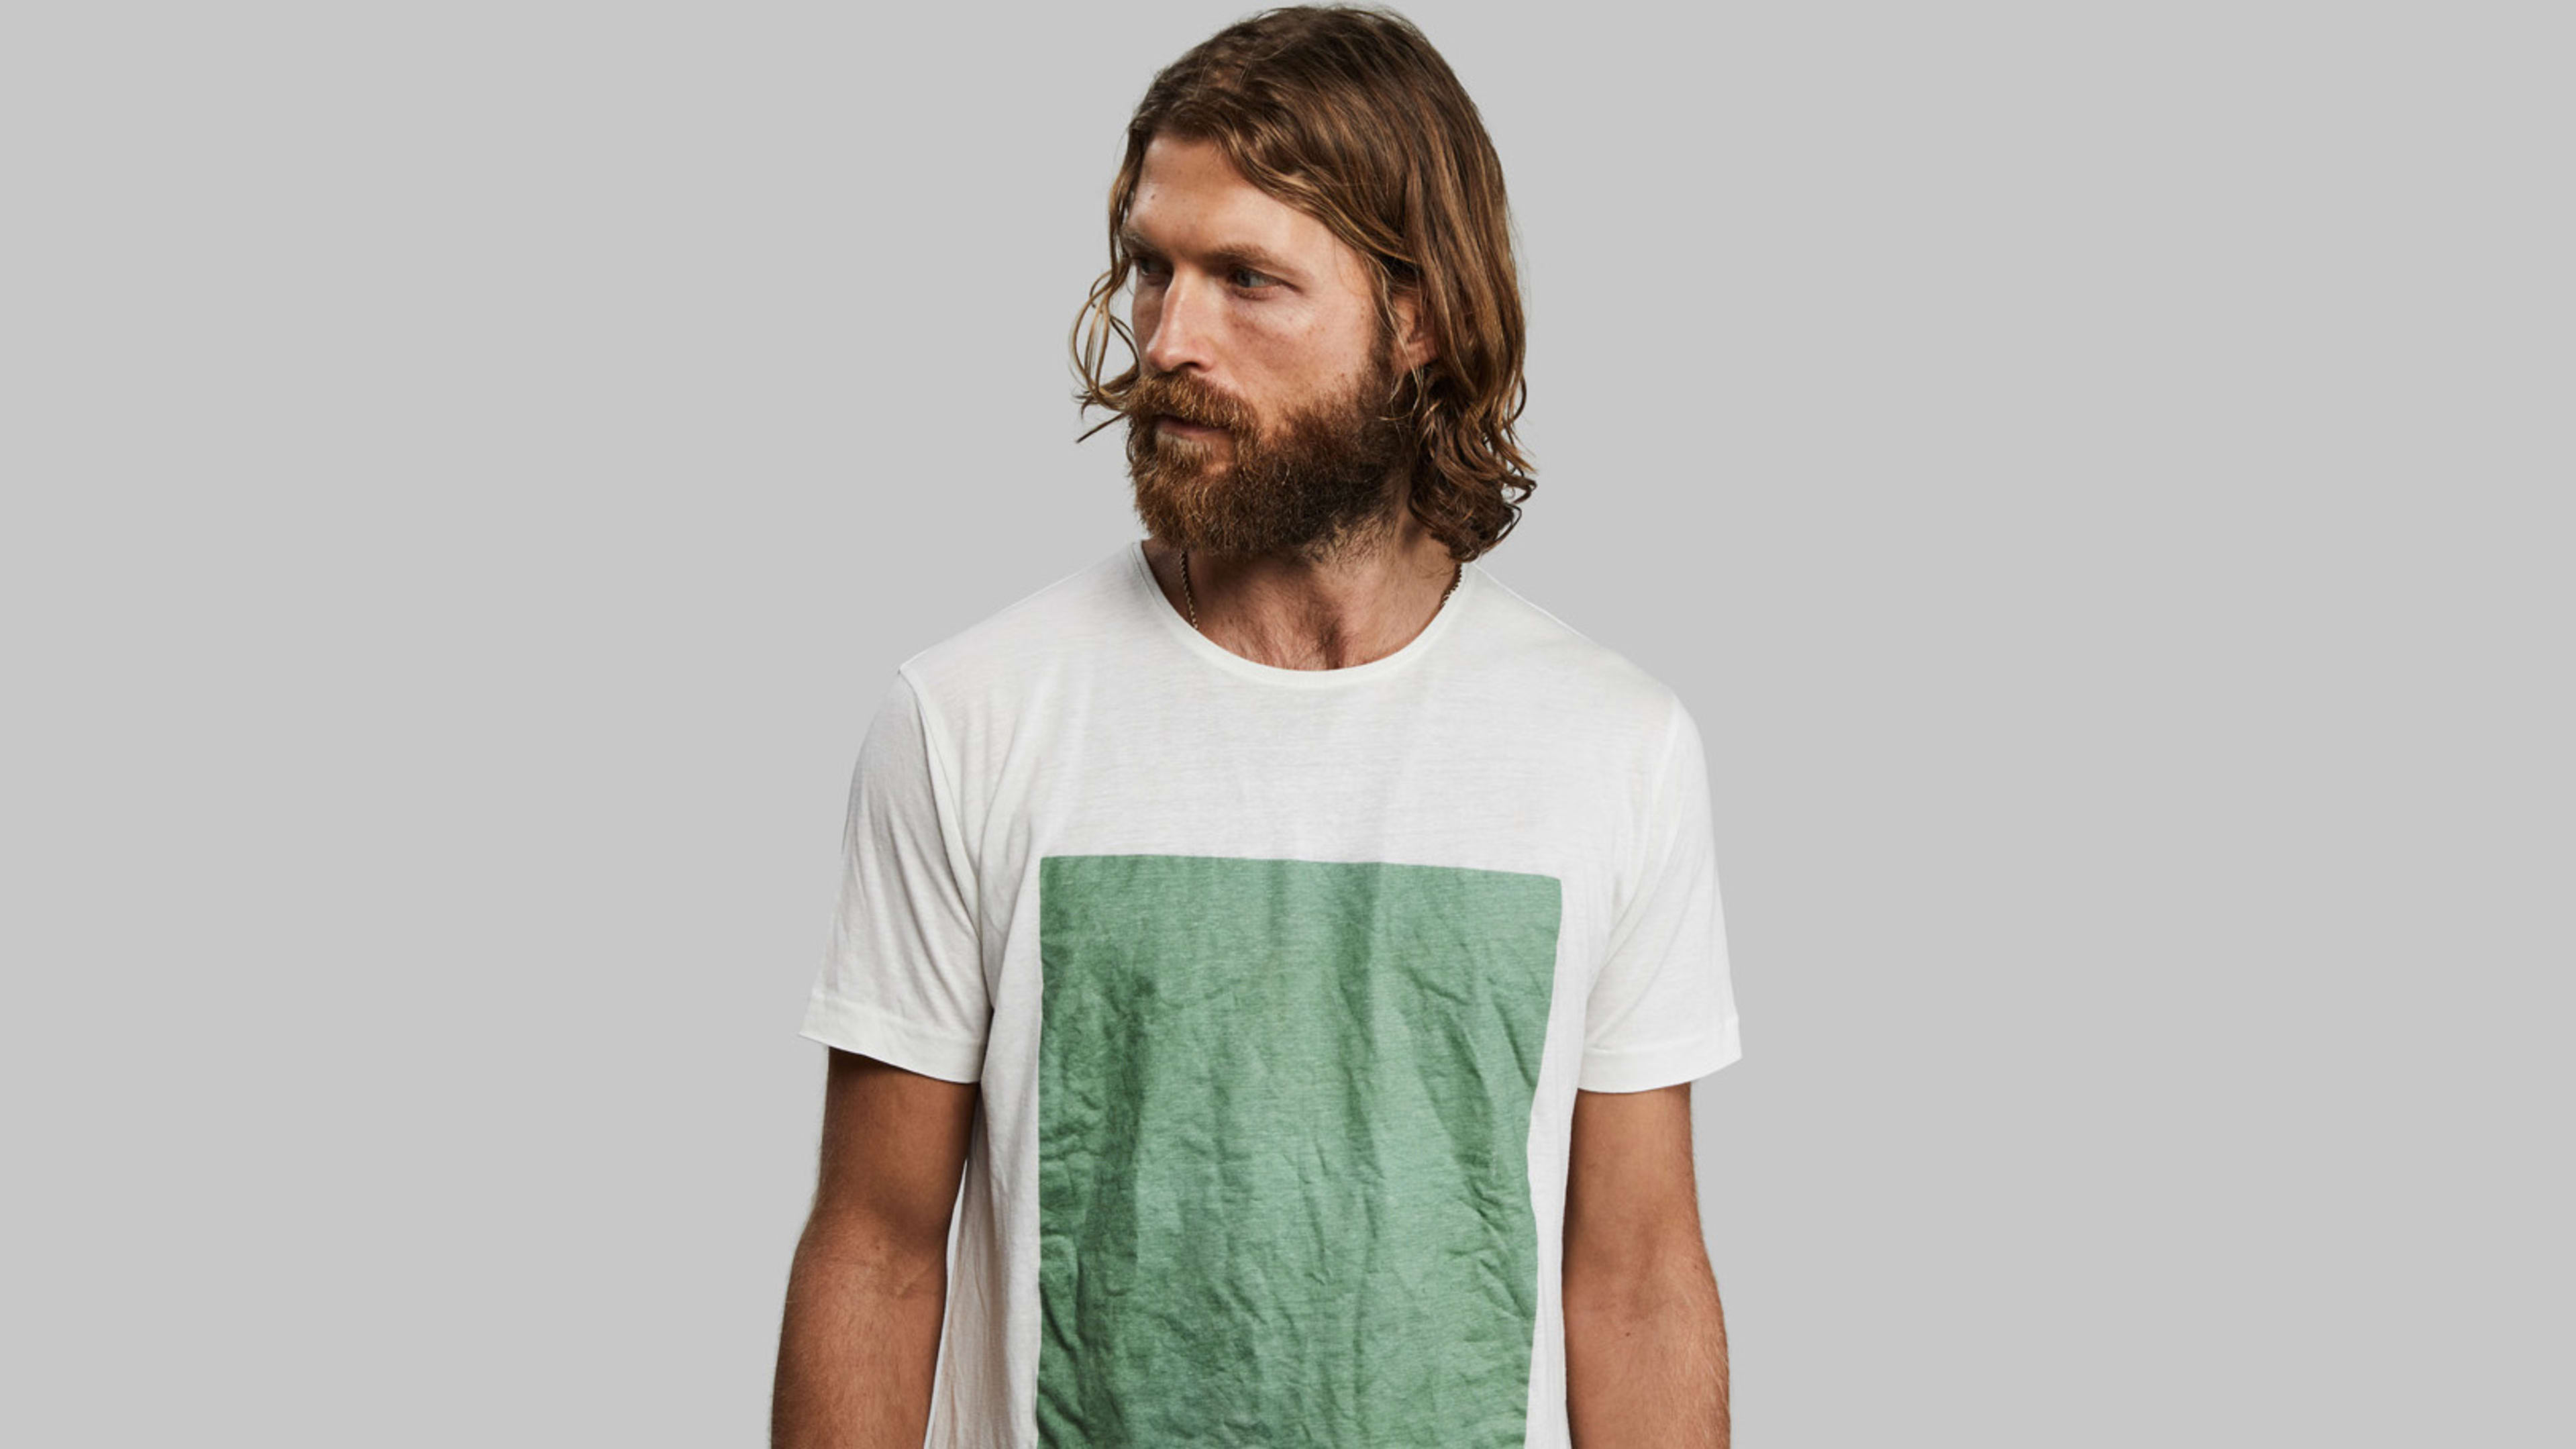 When you’re done with this T-shirt, bury it. It turns into worm food in 12 weeks